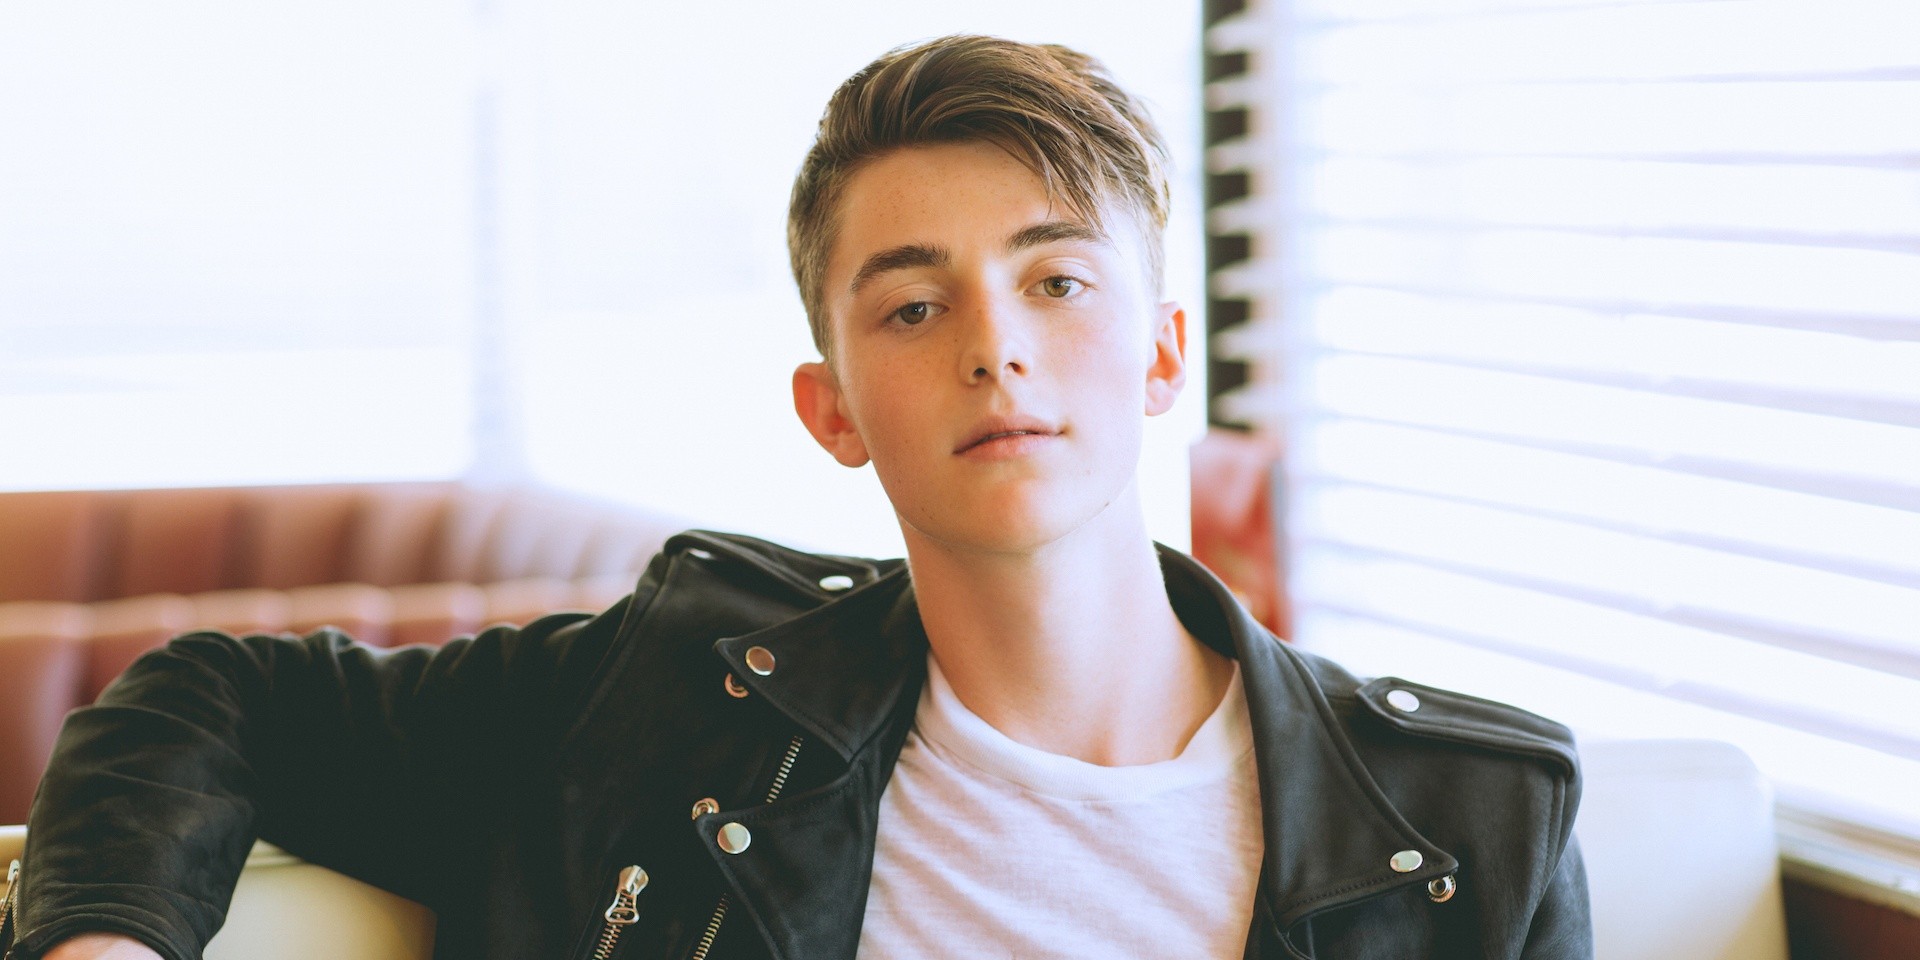 Greyson Chance to perform at a rooftop gig in Serangoon